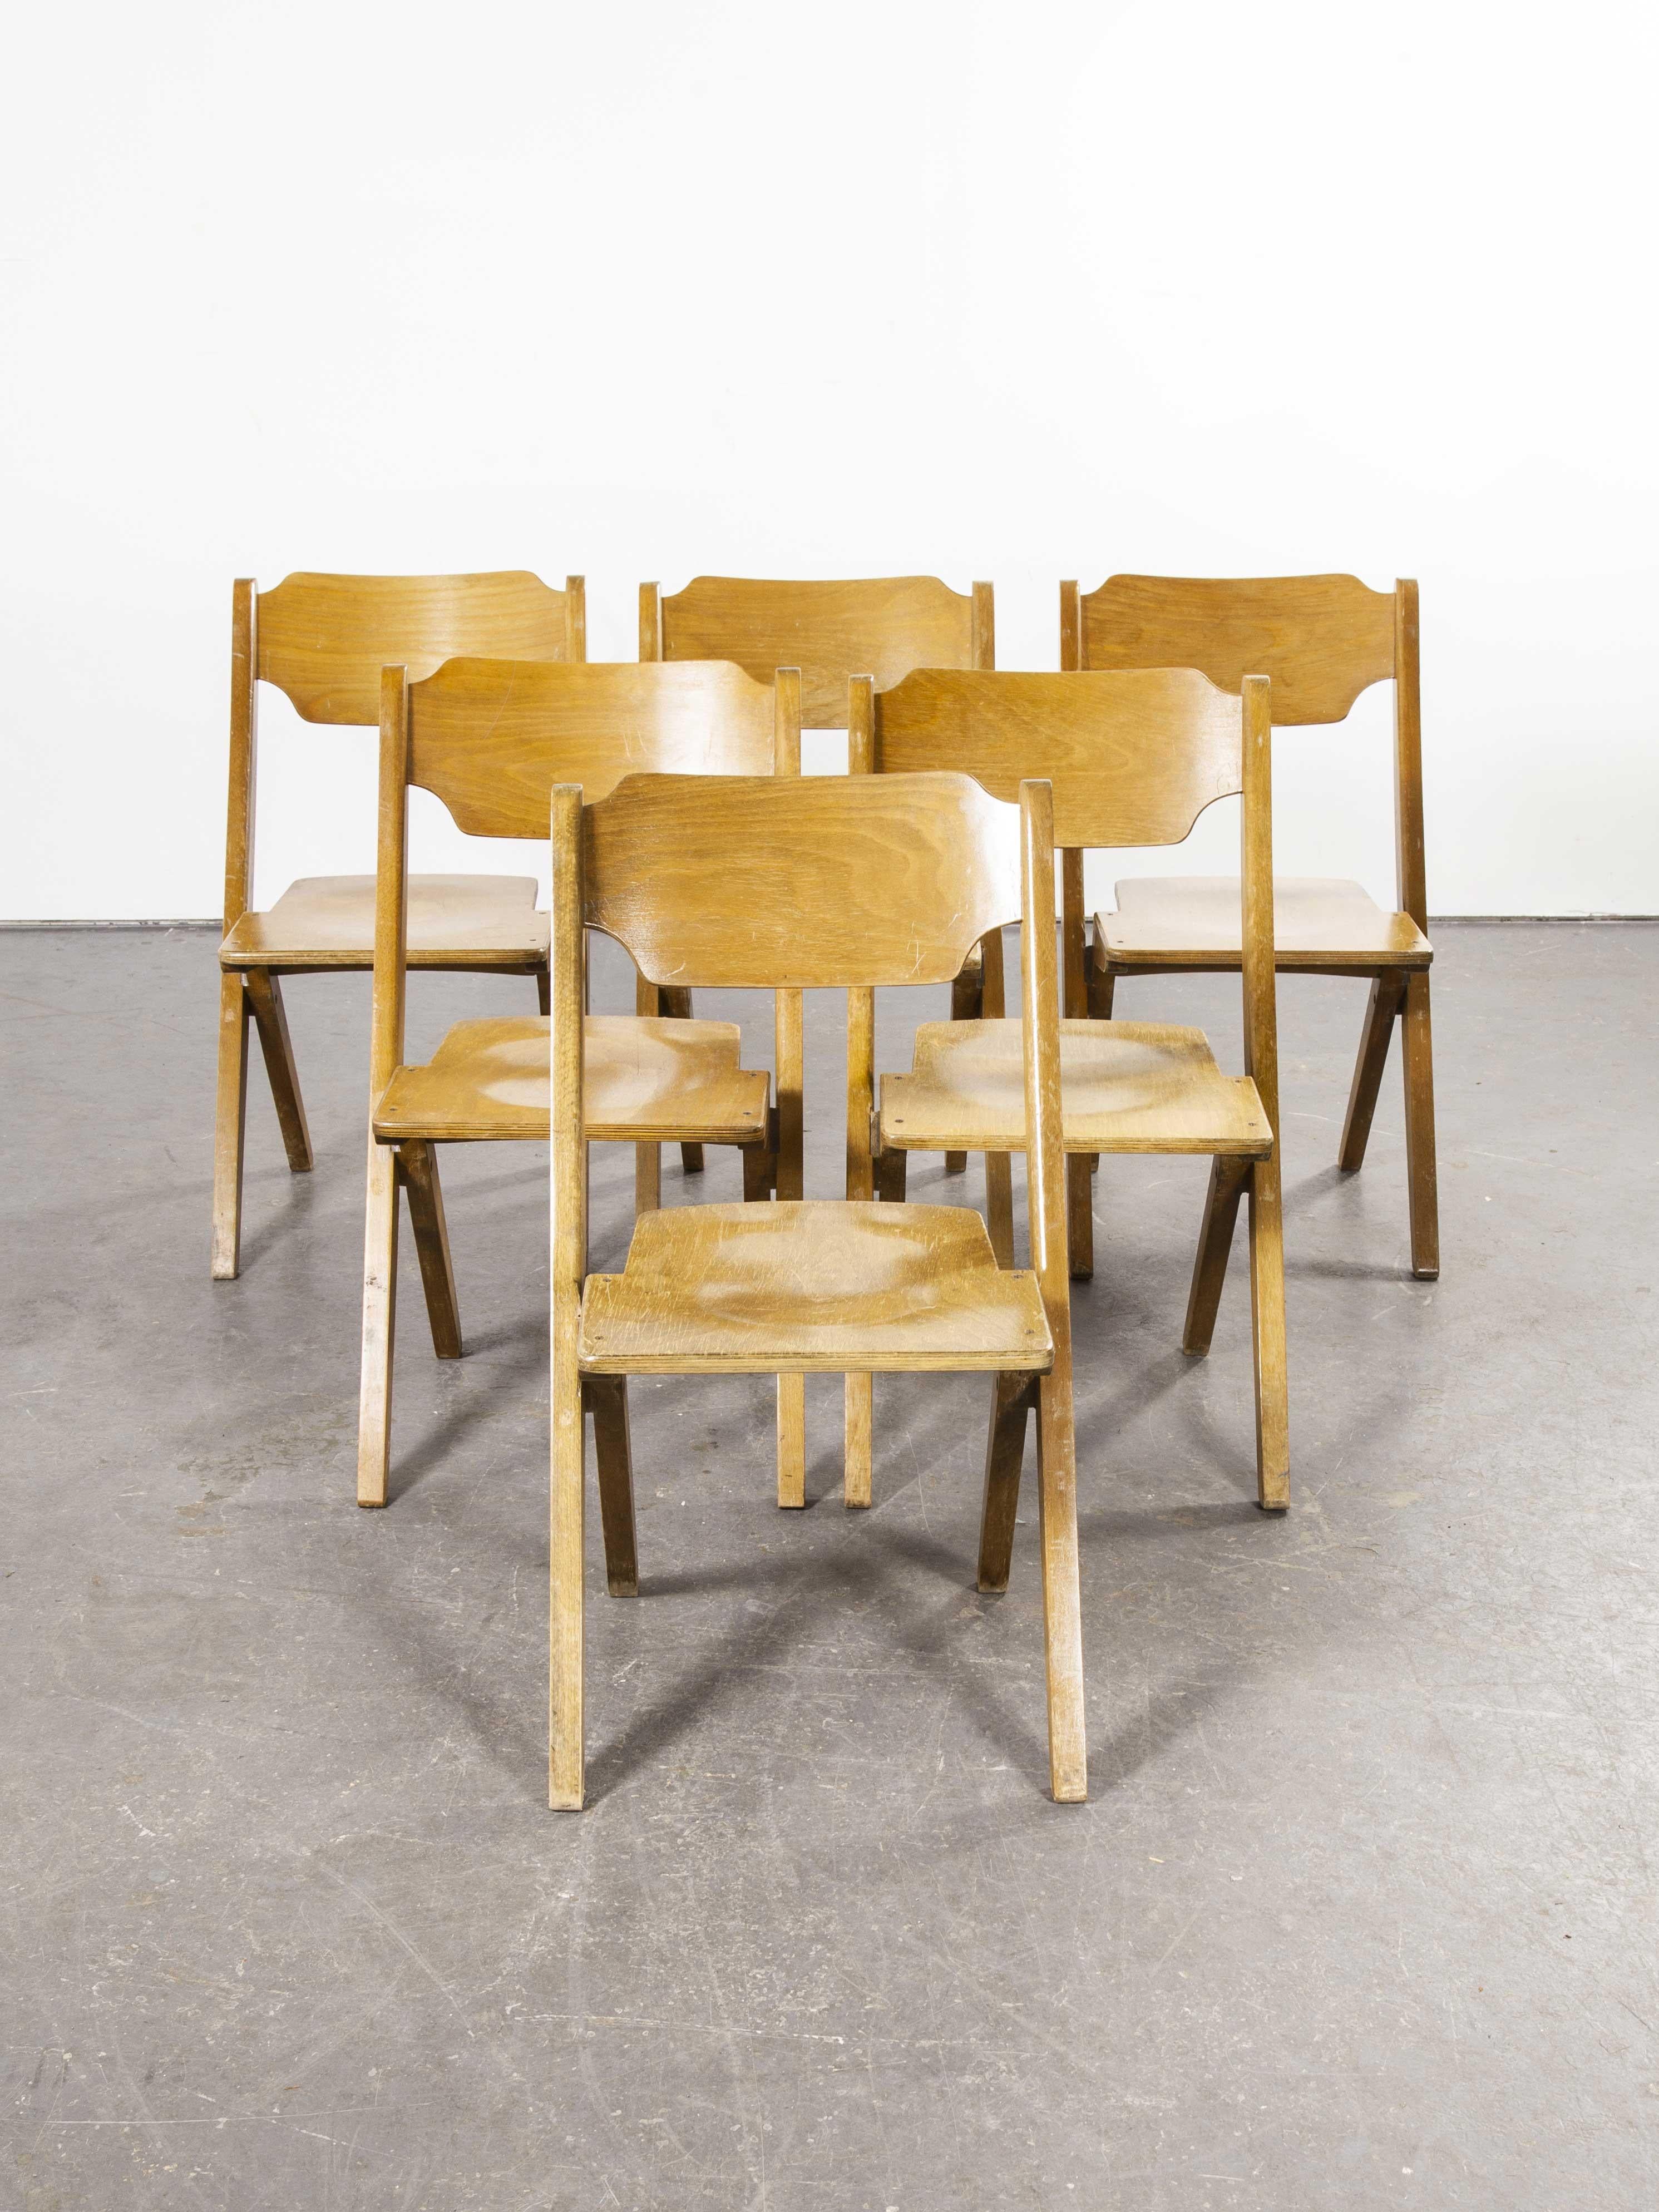 1960s Bombenstabil stacking beech dining chairs, set of six. We believe these chairs were made by Bombenstabil in Germany in the 1950s. They have the aesthetic of a folding chair but they are rigid fixed chairs that by their design stack incredibly